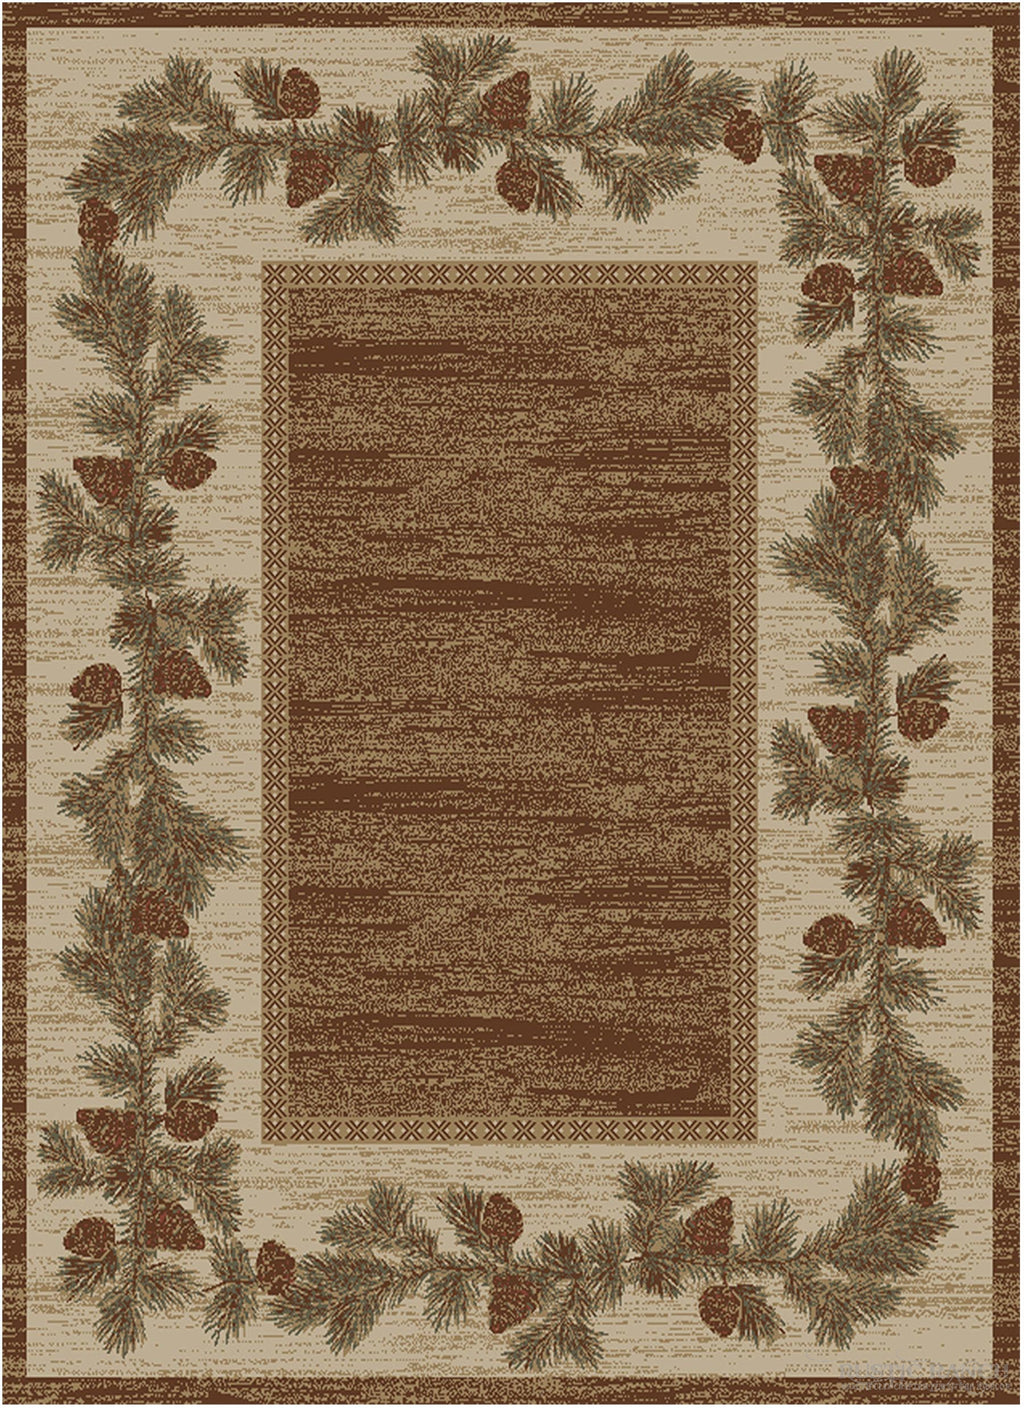 MOUNTAIN VIEW BROWN AREA RUGS-Rustic Ranch